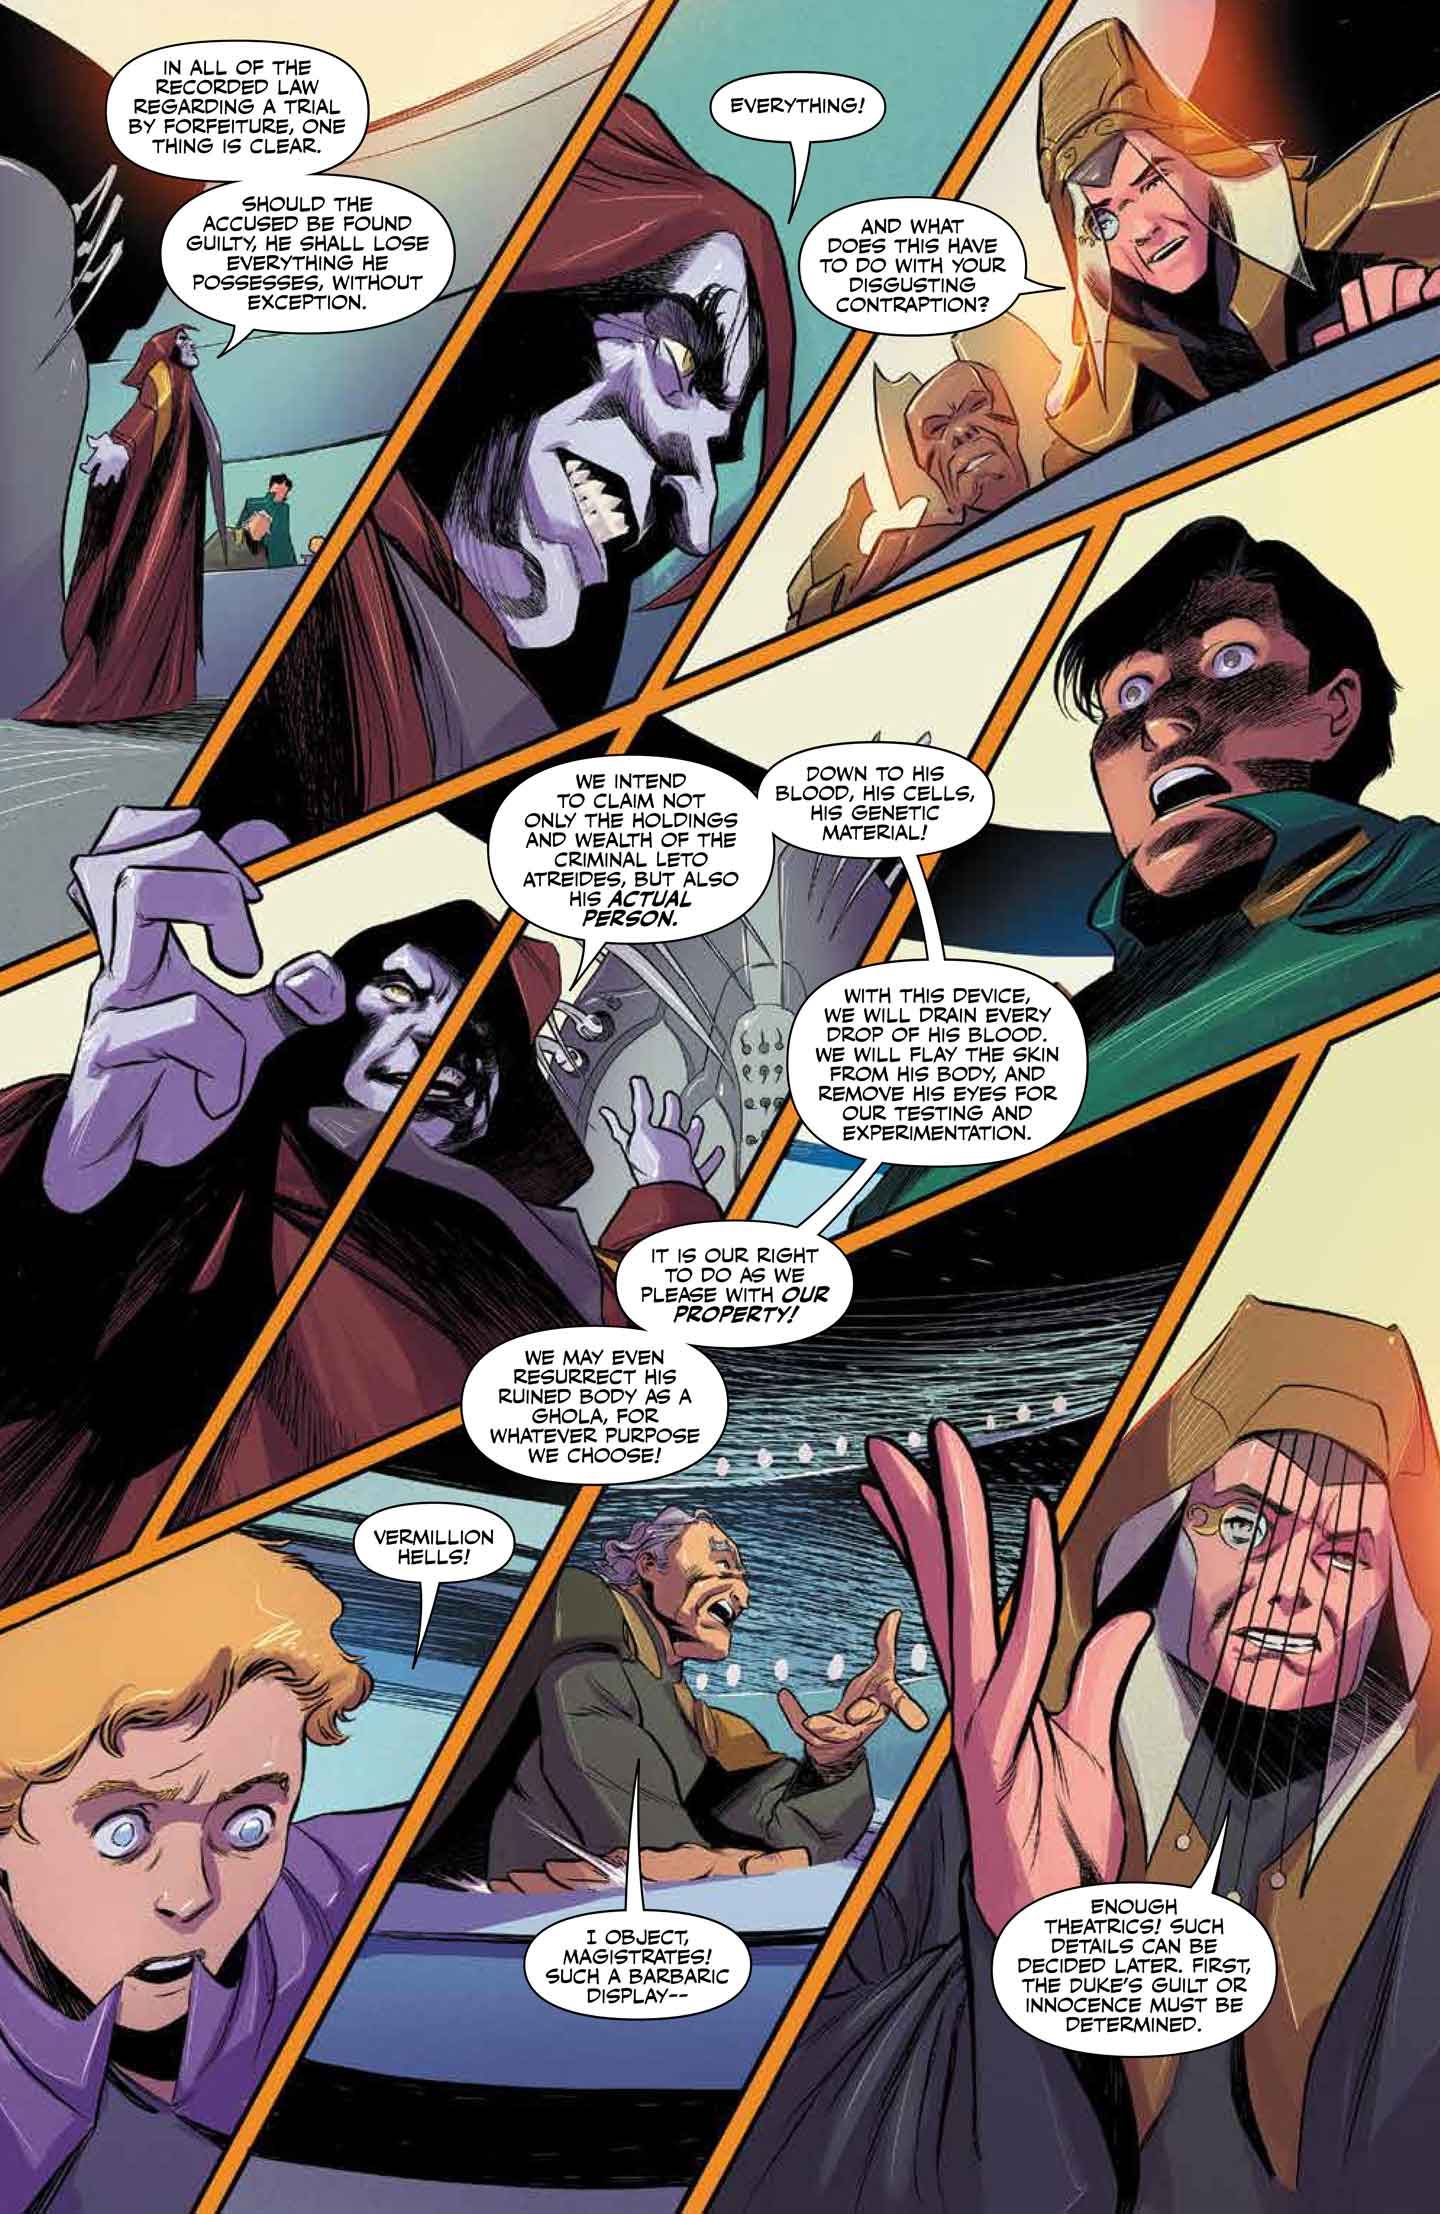 Dune: House Atreides comic series. Issue #12, preview page 3.